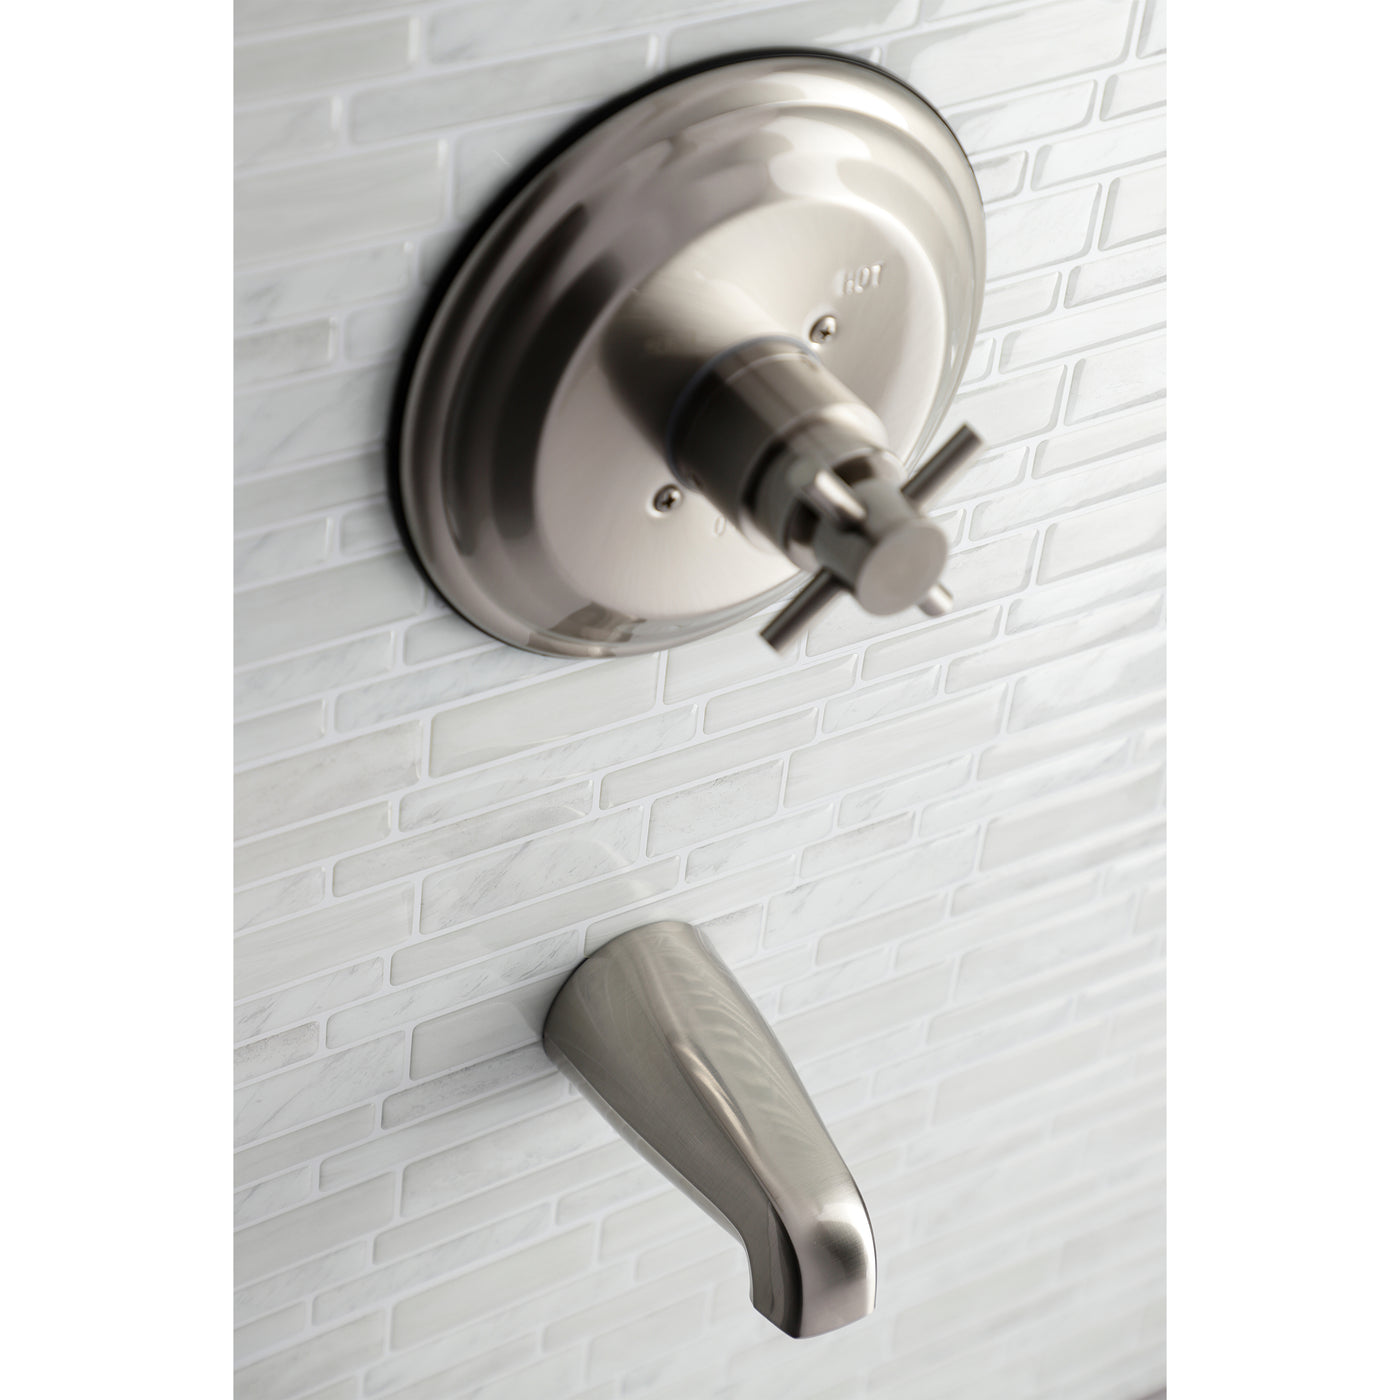 Elements of Design EB2638DXTO Tub Only Faucet, Brushed Nickel